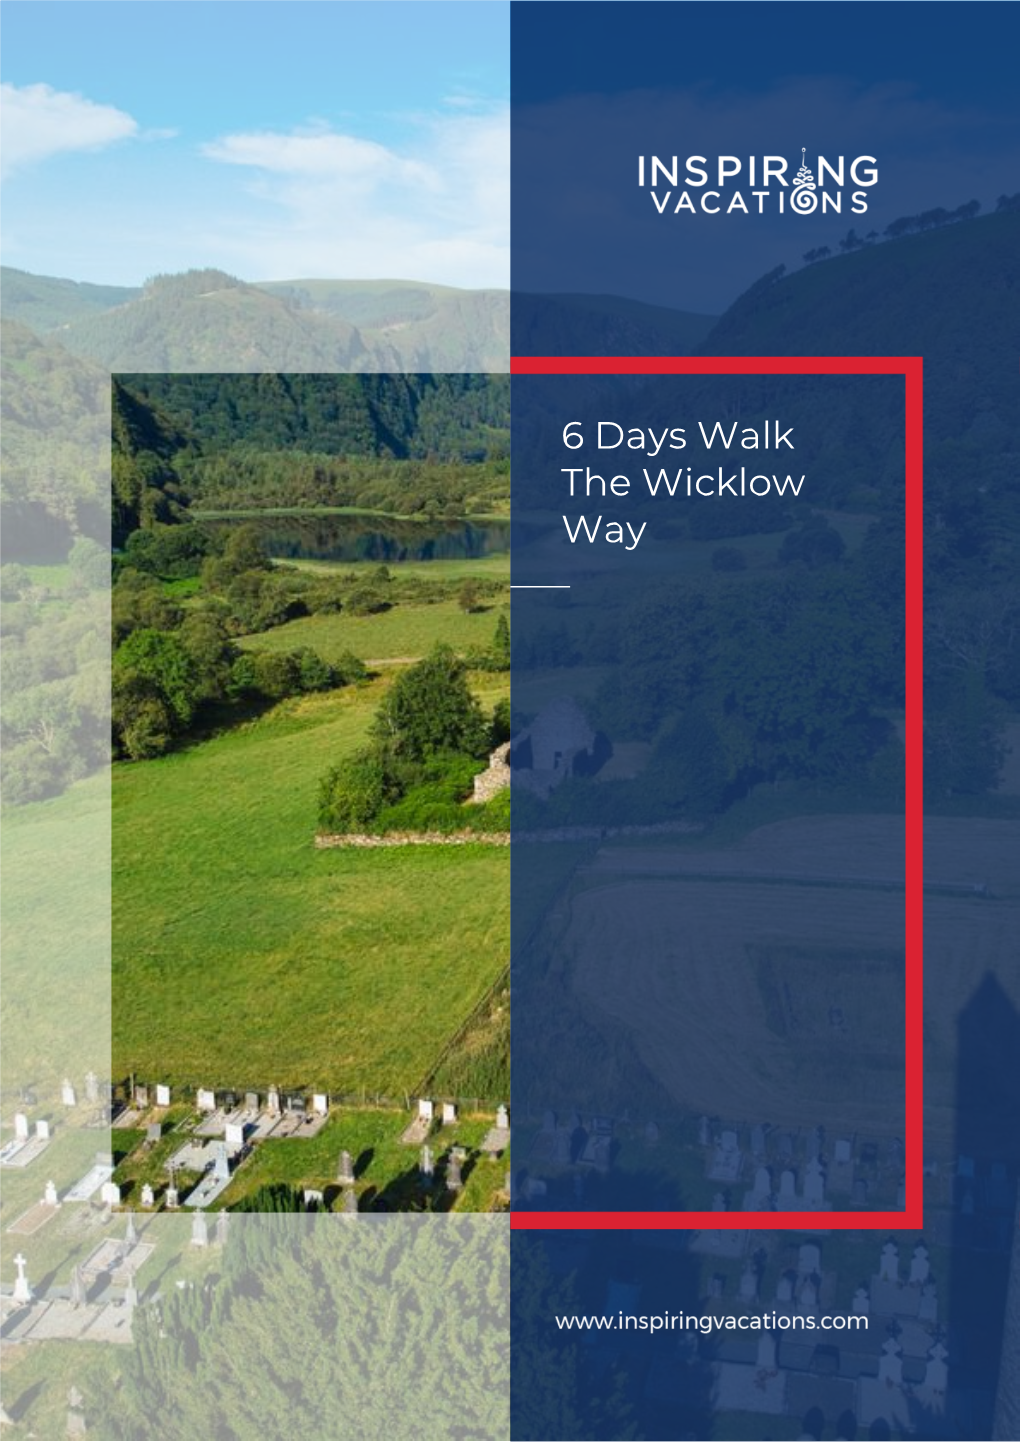 6 Days Walk the Wicklow Way Get Ready to Be Inspired